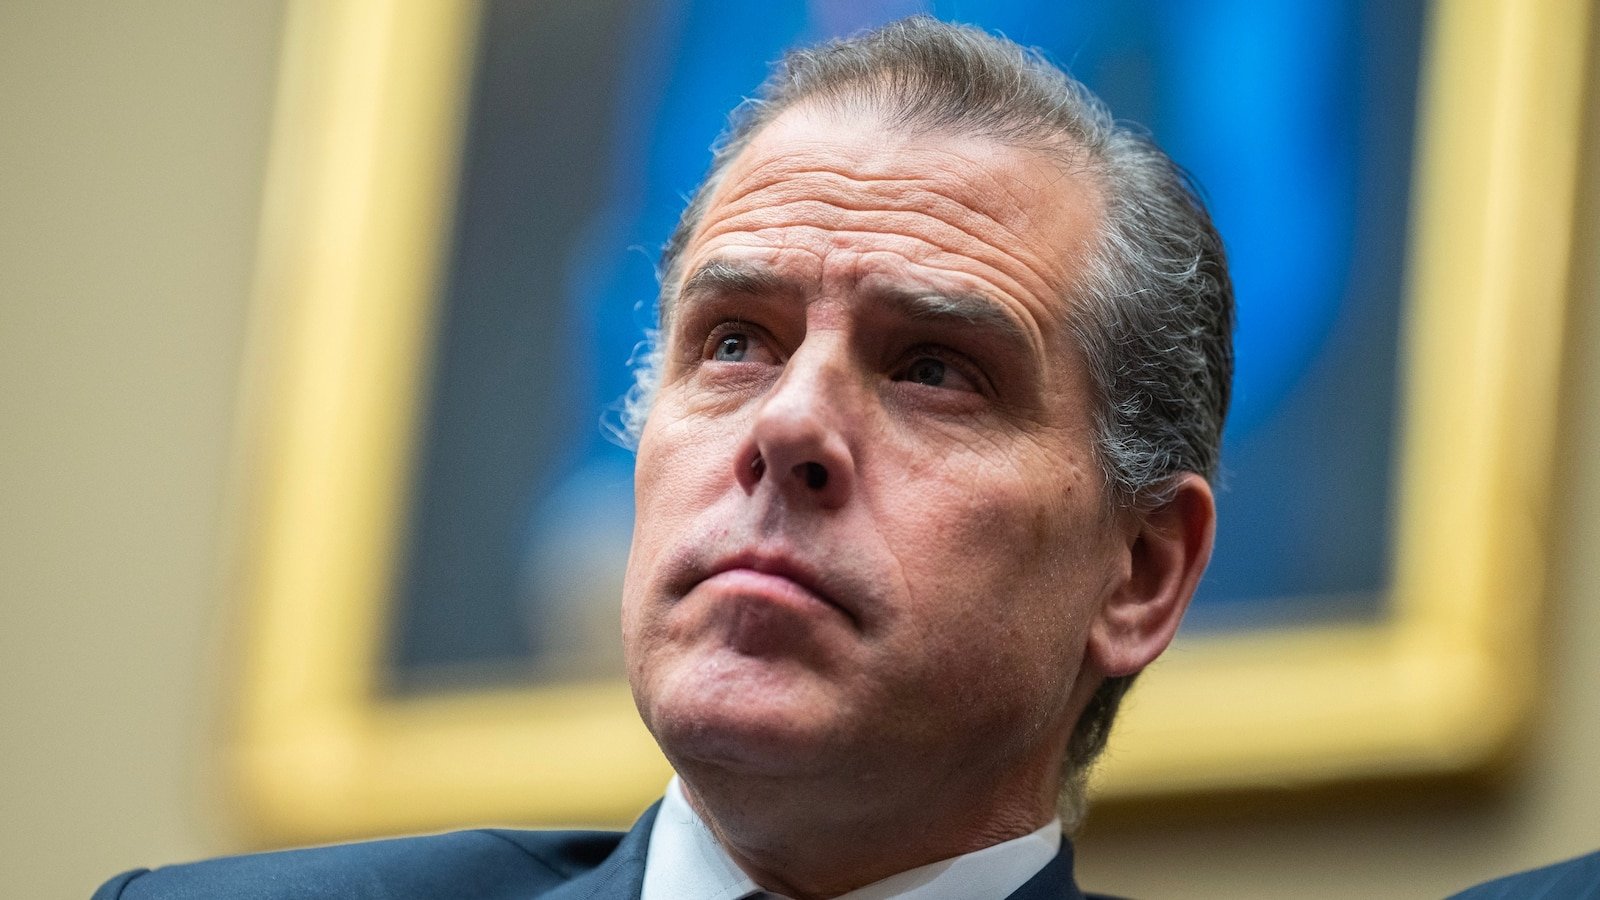 Judge rejects Hunter Biden's appeal on gun charges, paving way for trial in June